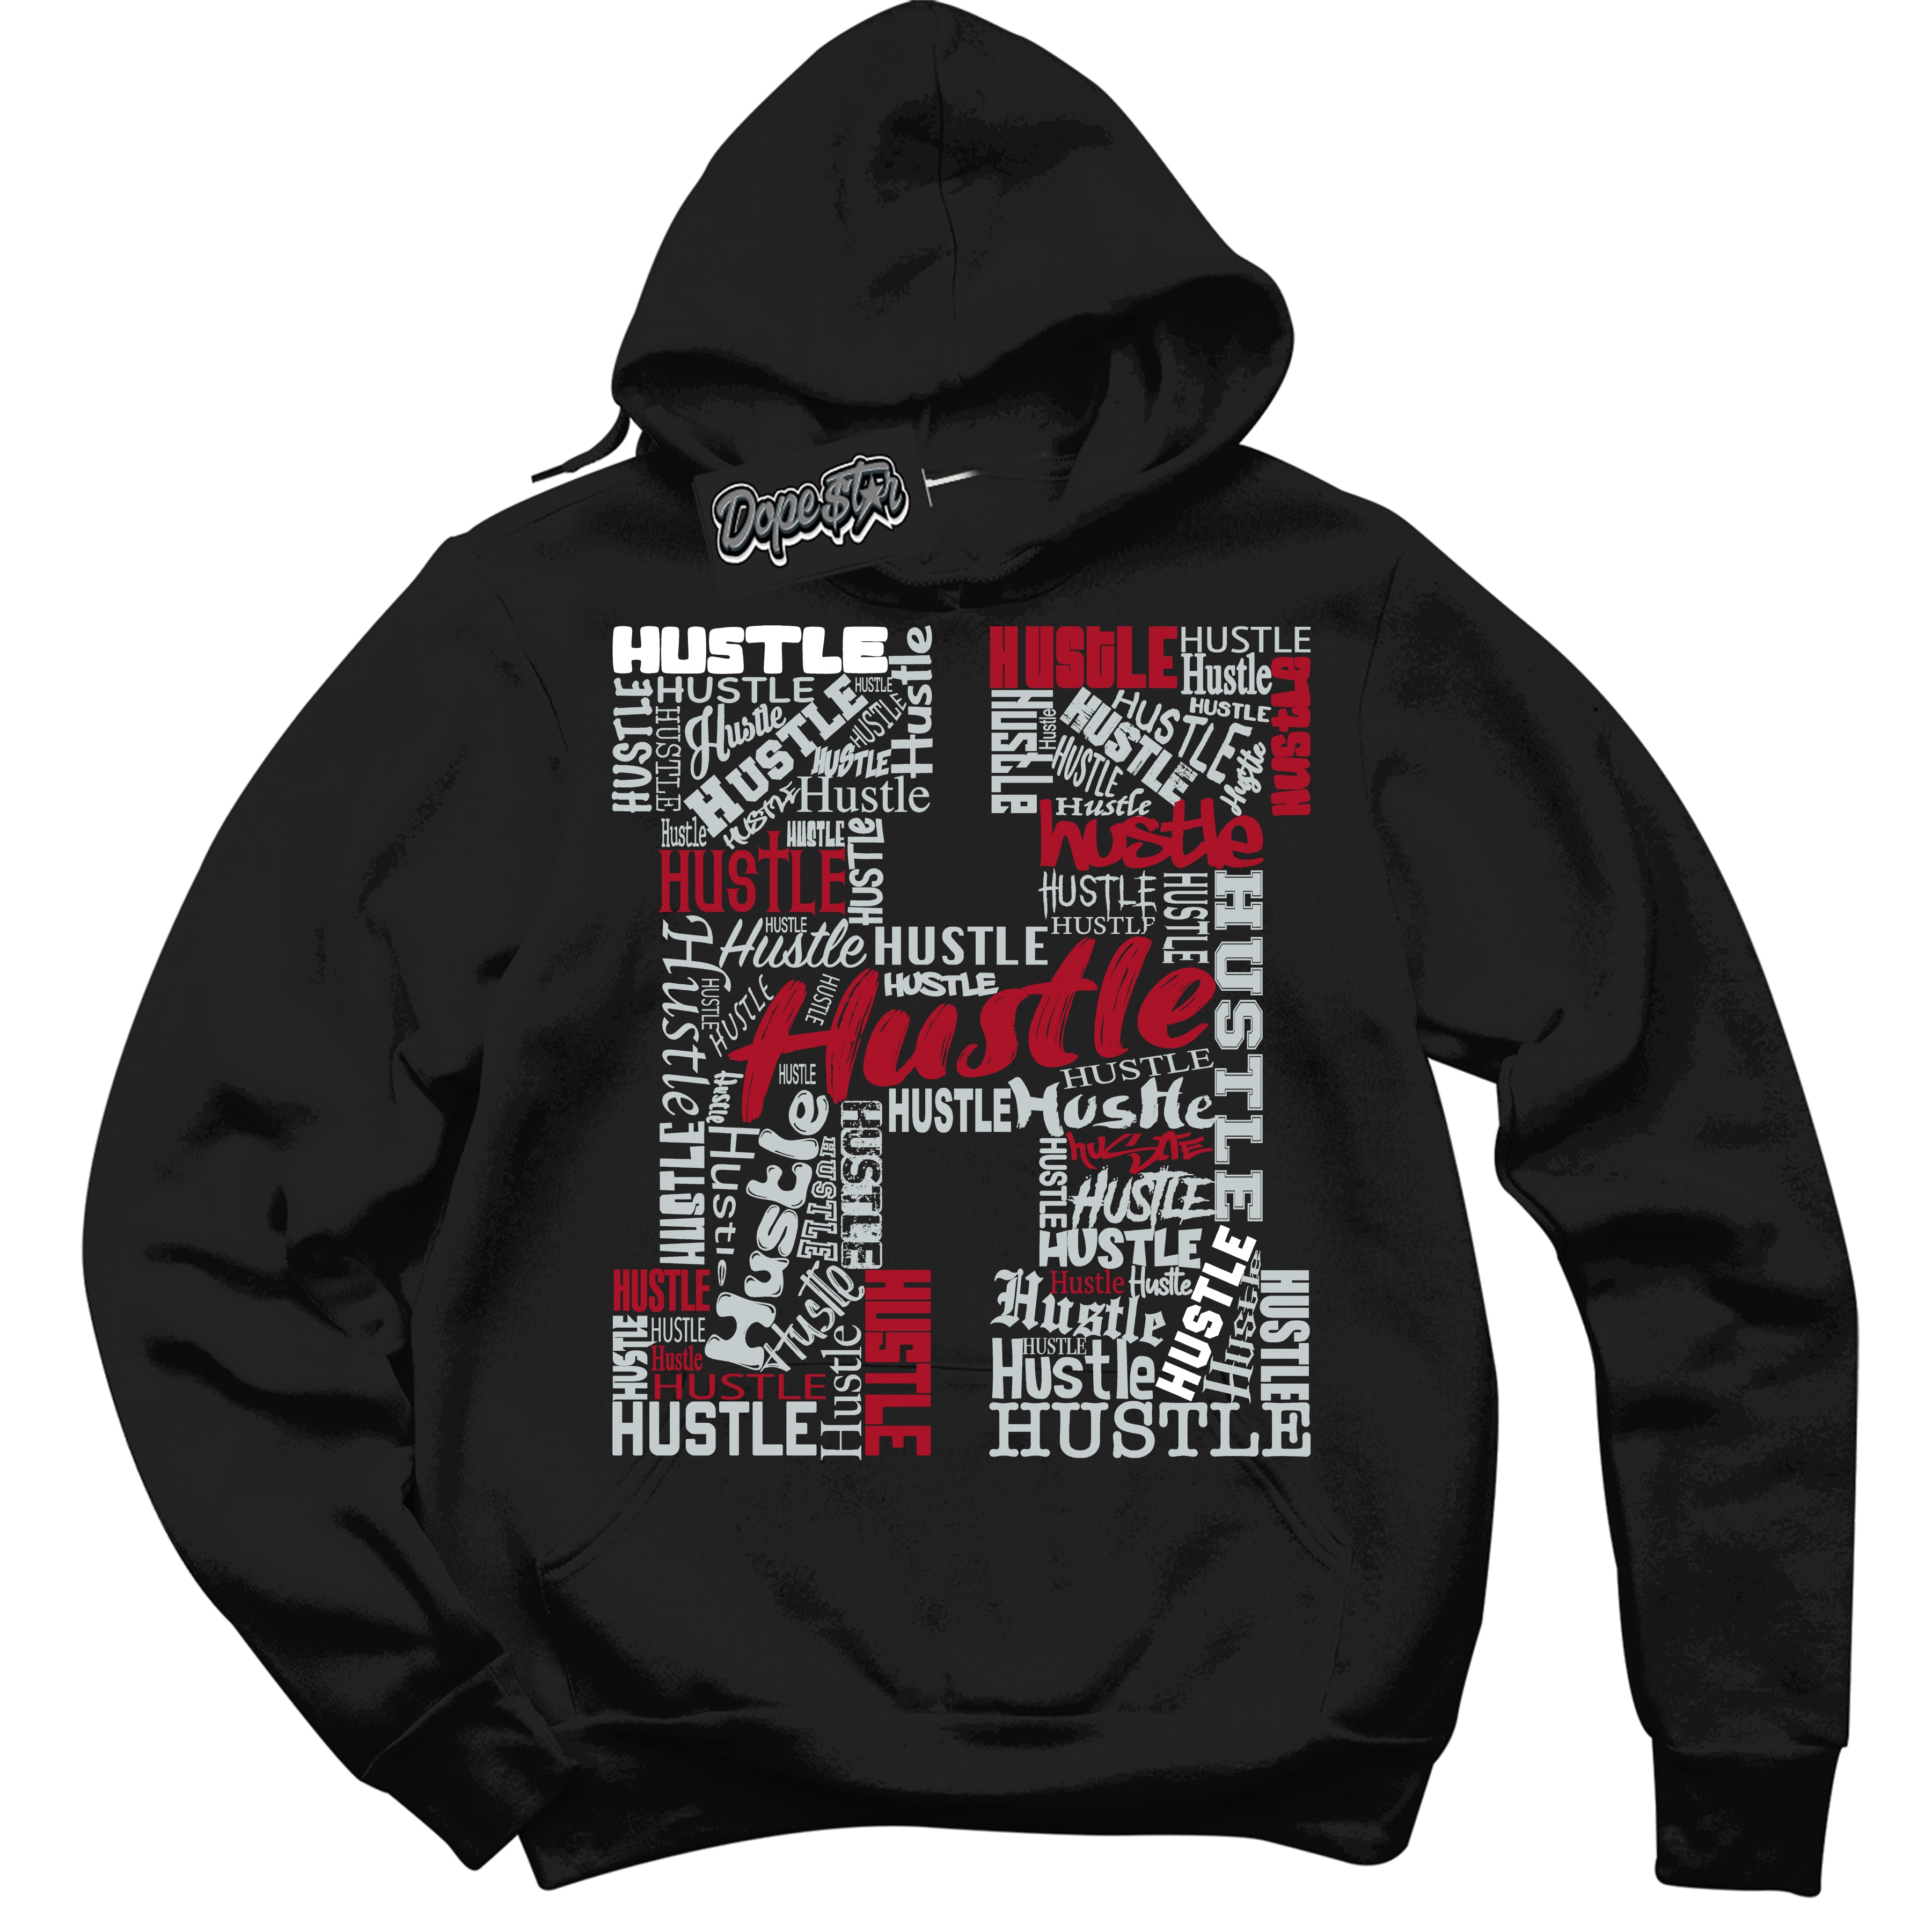 Cool Black Hoodie with “ Hustle H ”  design that Perfectly Matches  Reverse Ultraman Sneakers.